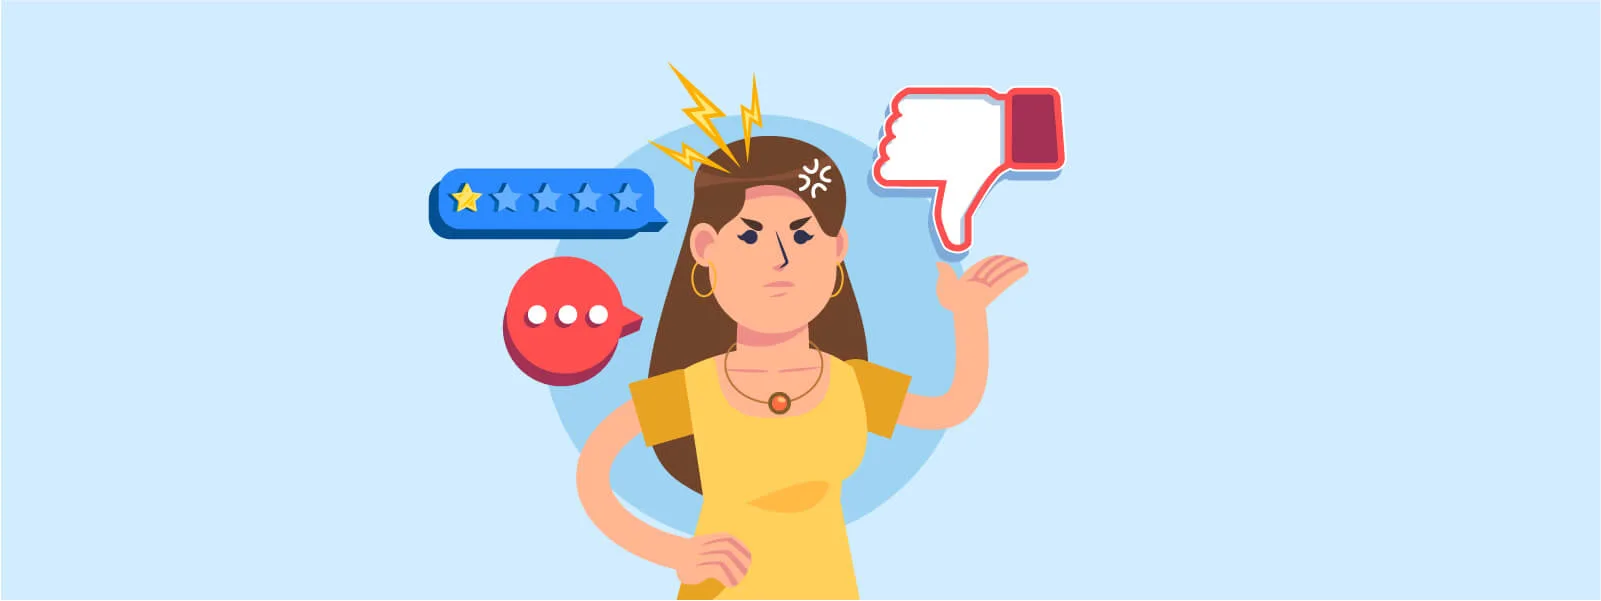 how to respond social media negative comments